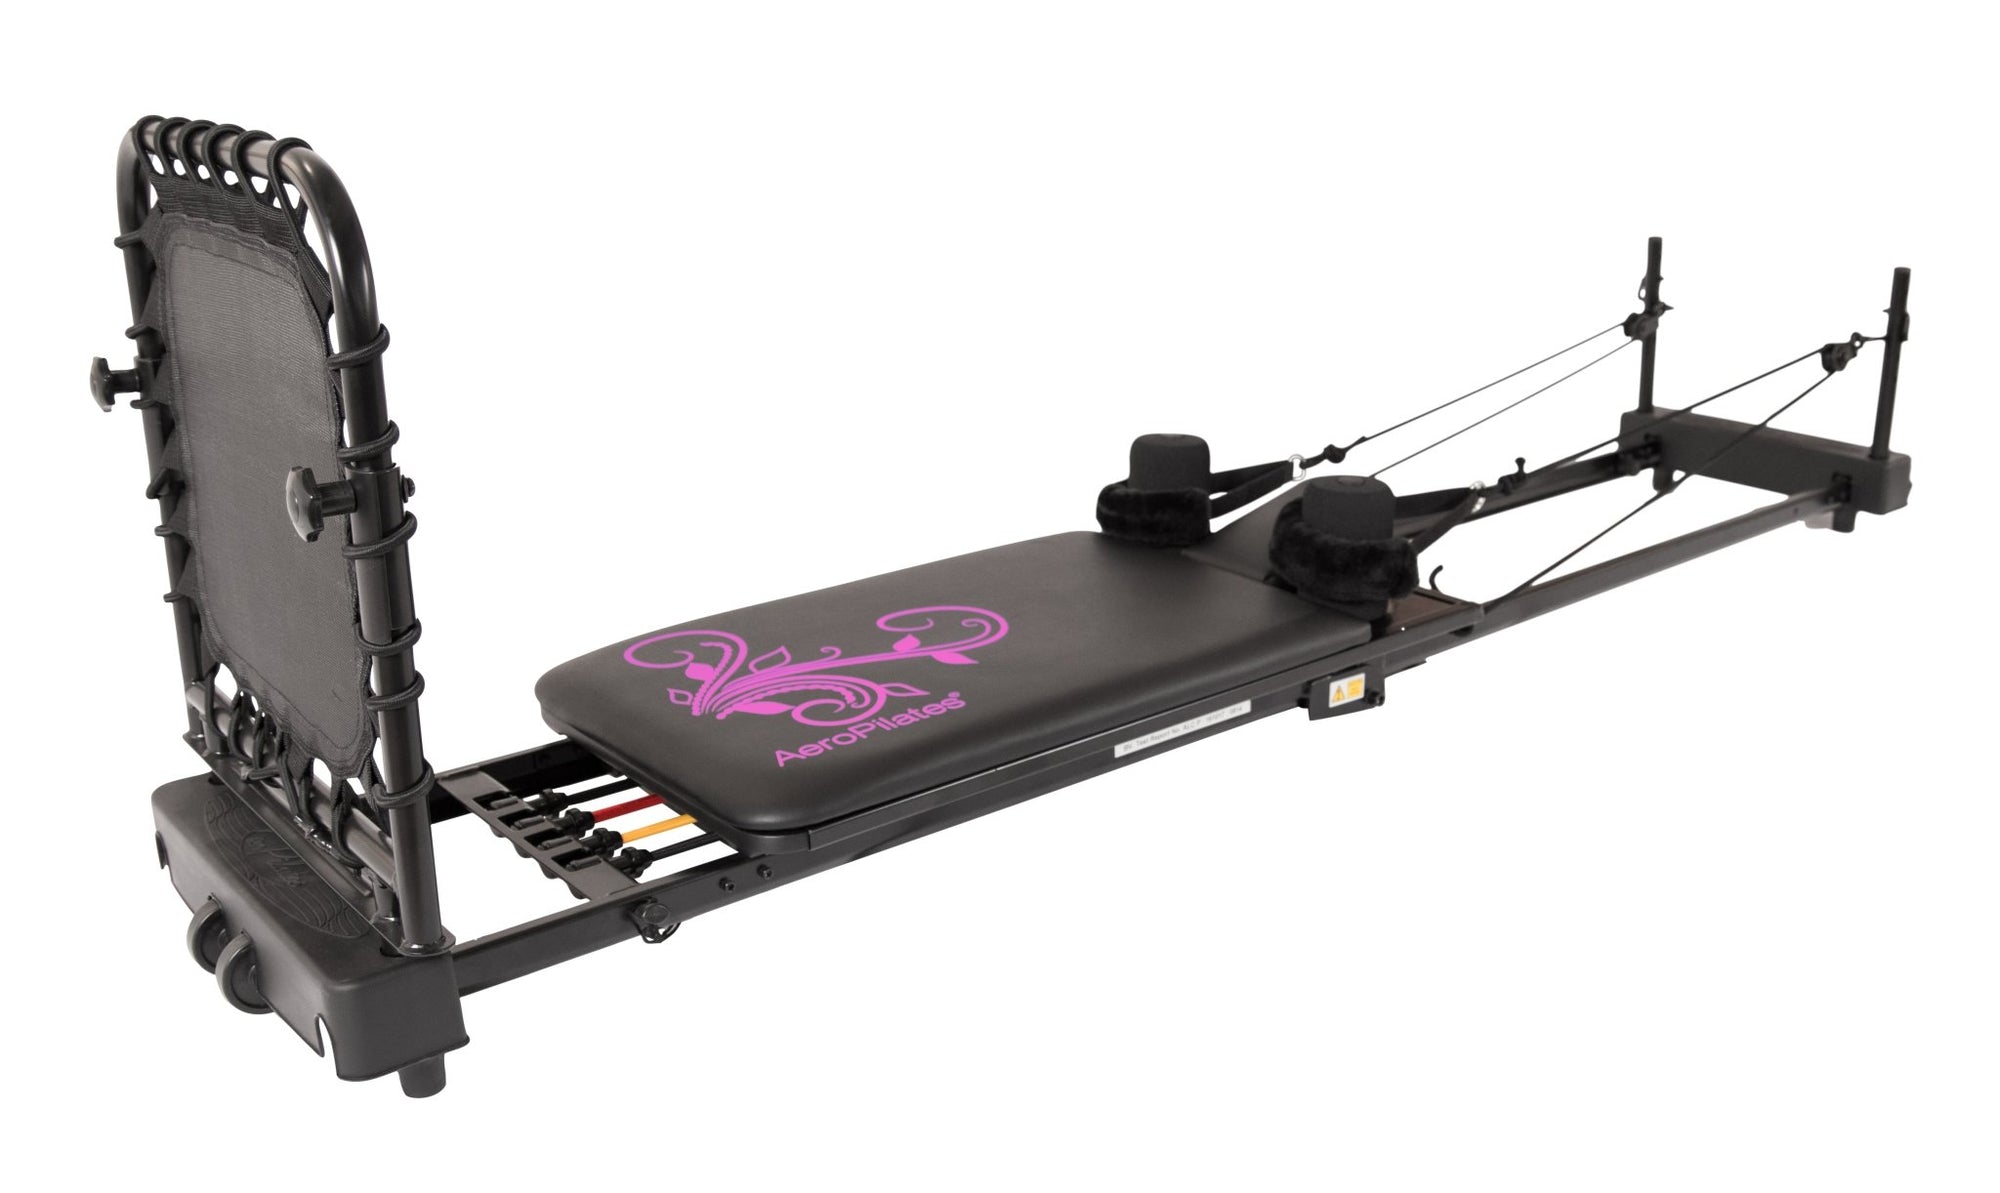 Best Aero Pilates Machine With Dvds And Poster for sale in